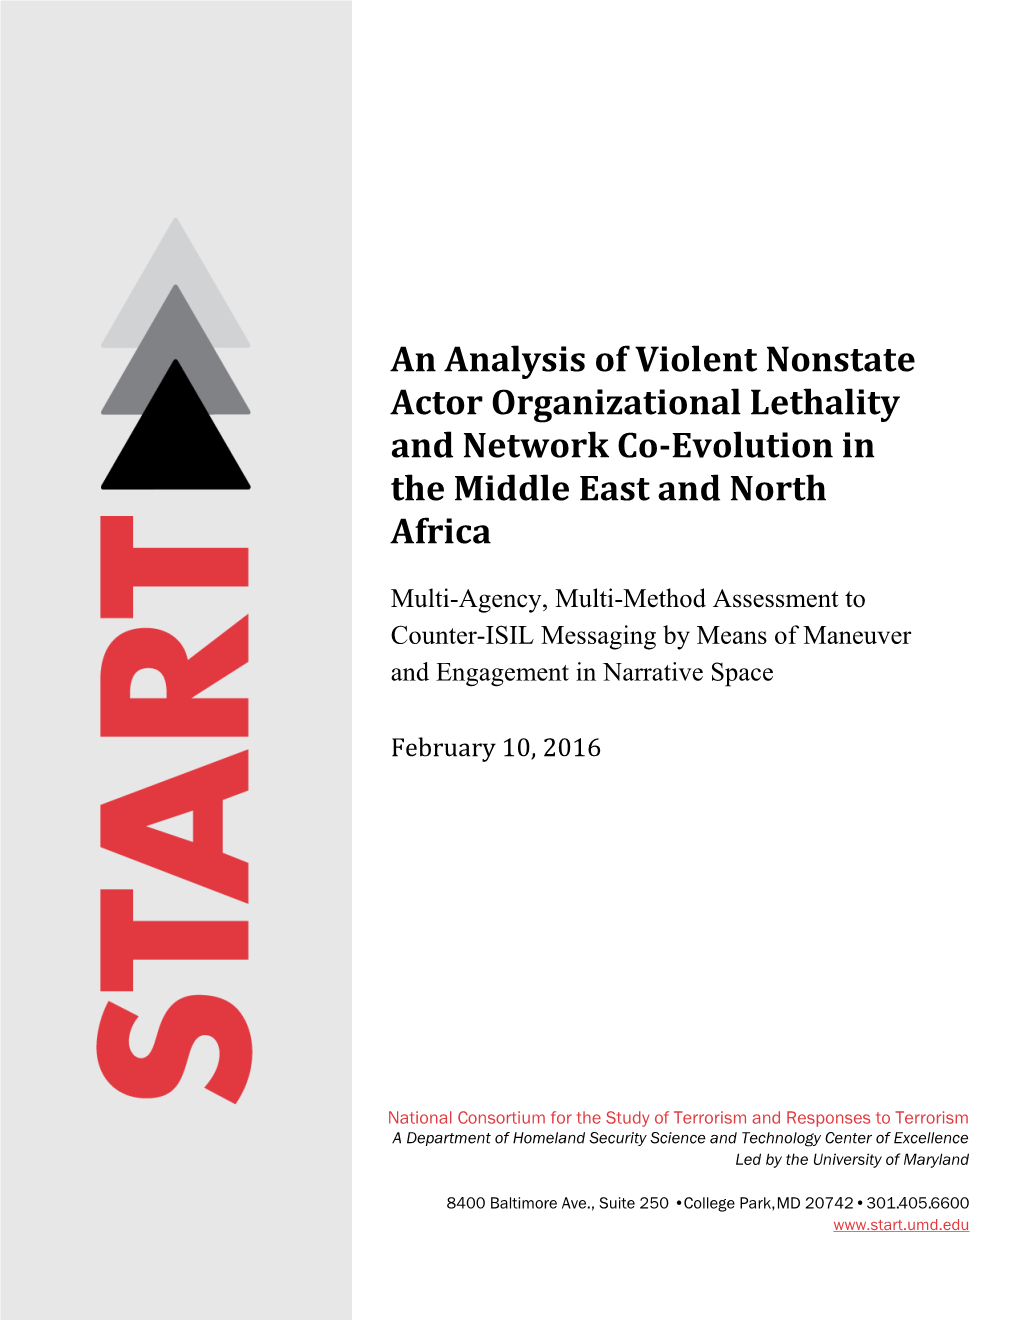 An Analysis of Violent Nonstate Actor Organizational Lethality and Network Co-Evolution in the Middle East and North Africa